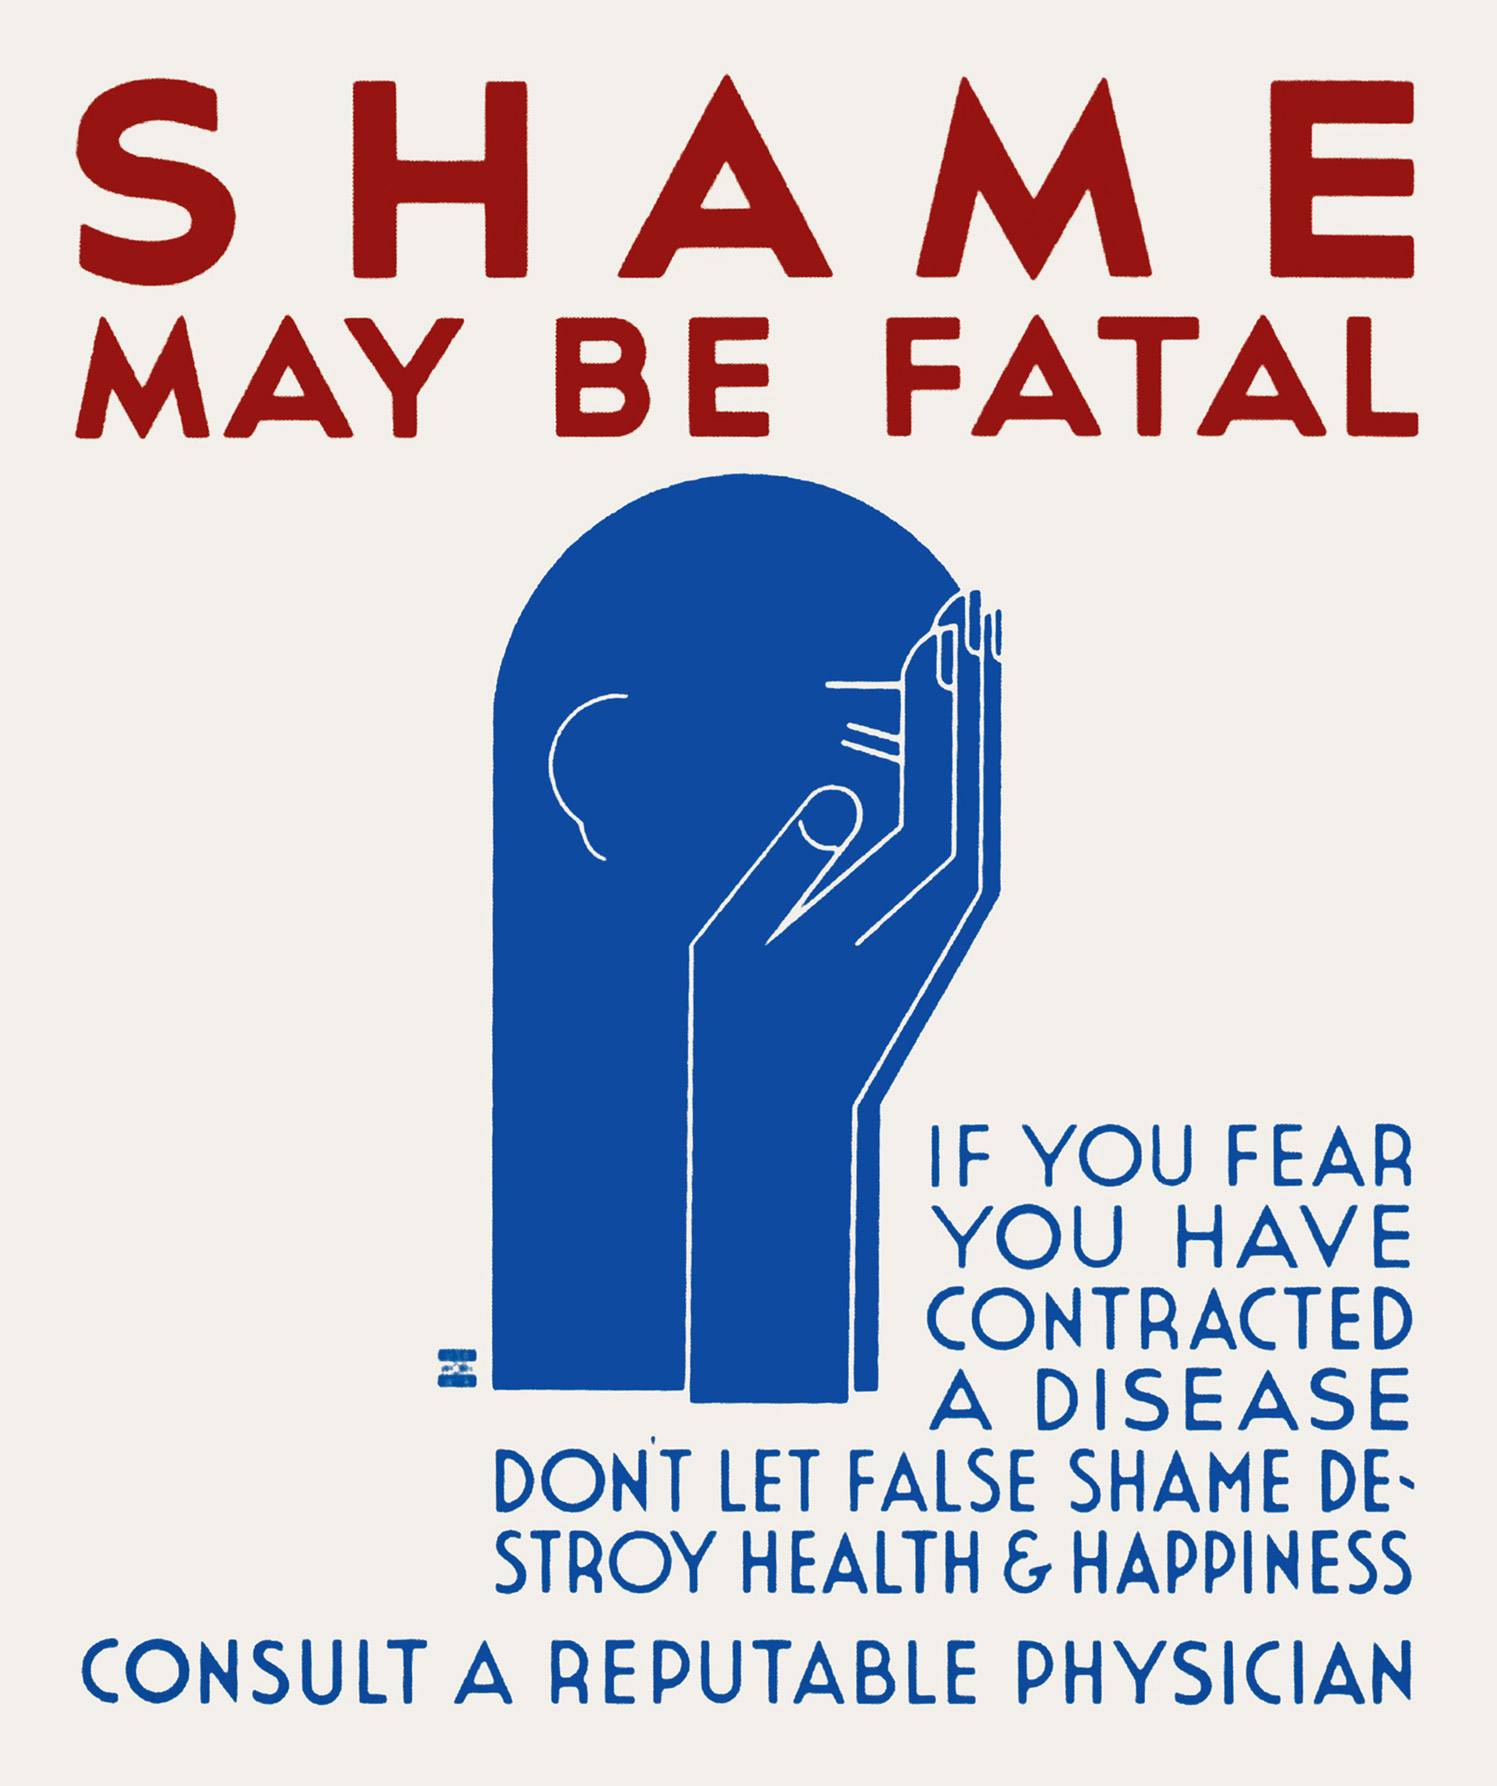 Nineteen thirty-seven public health poster designed by Foster Humfreville and Alex Kallenberg for the Works Progress Adminstration Federal Art Project.